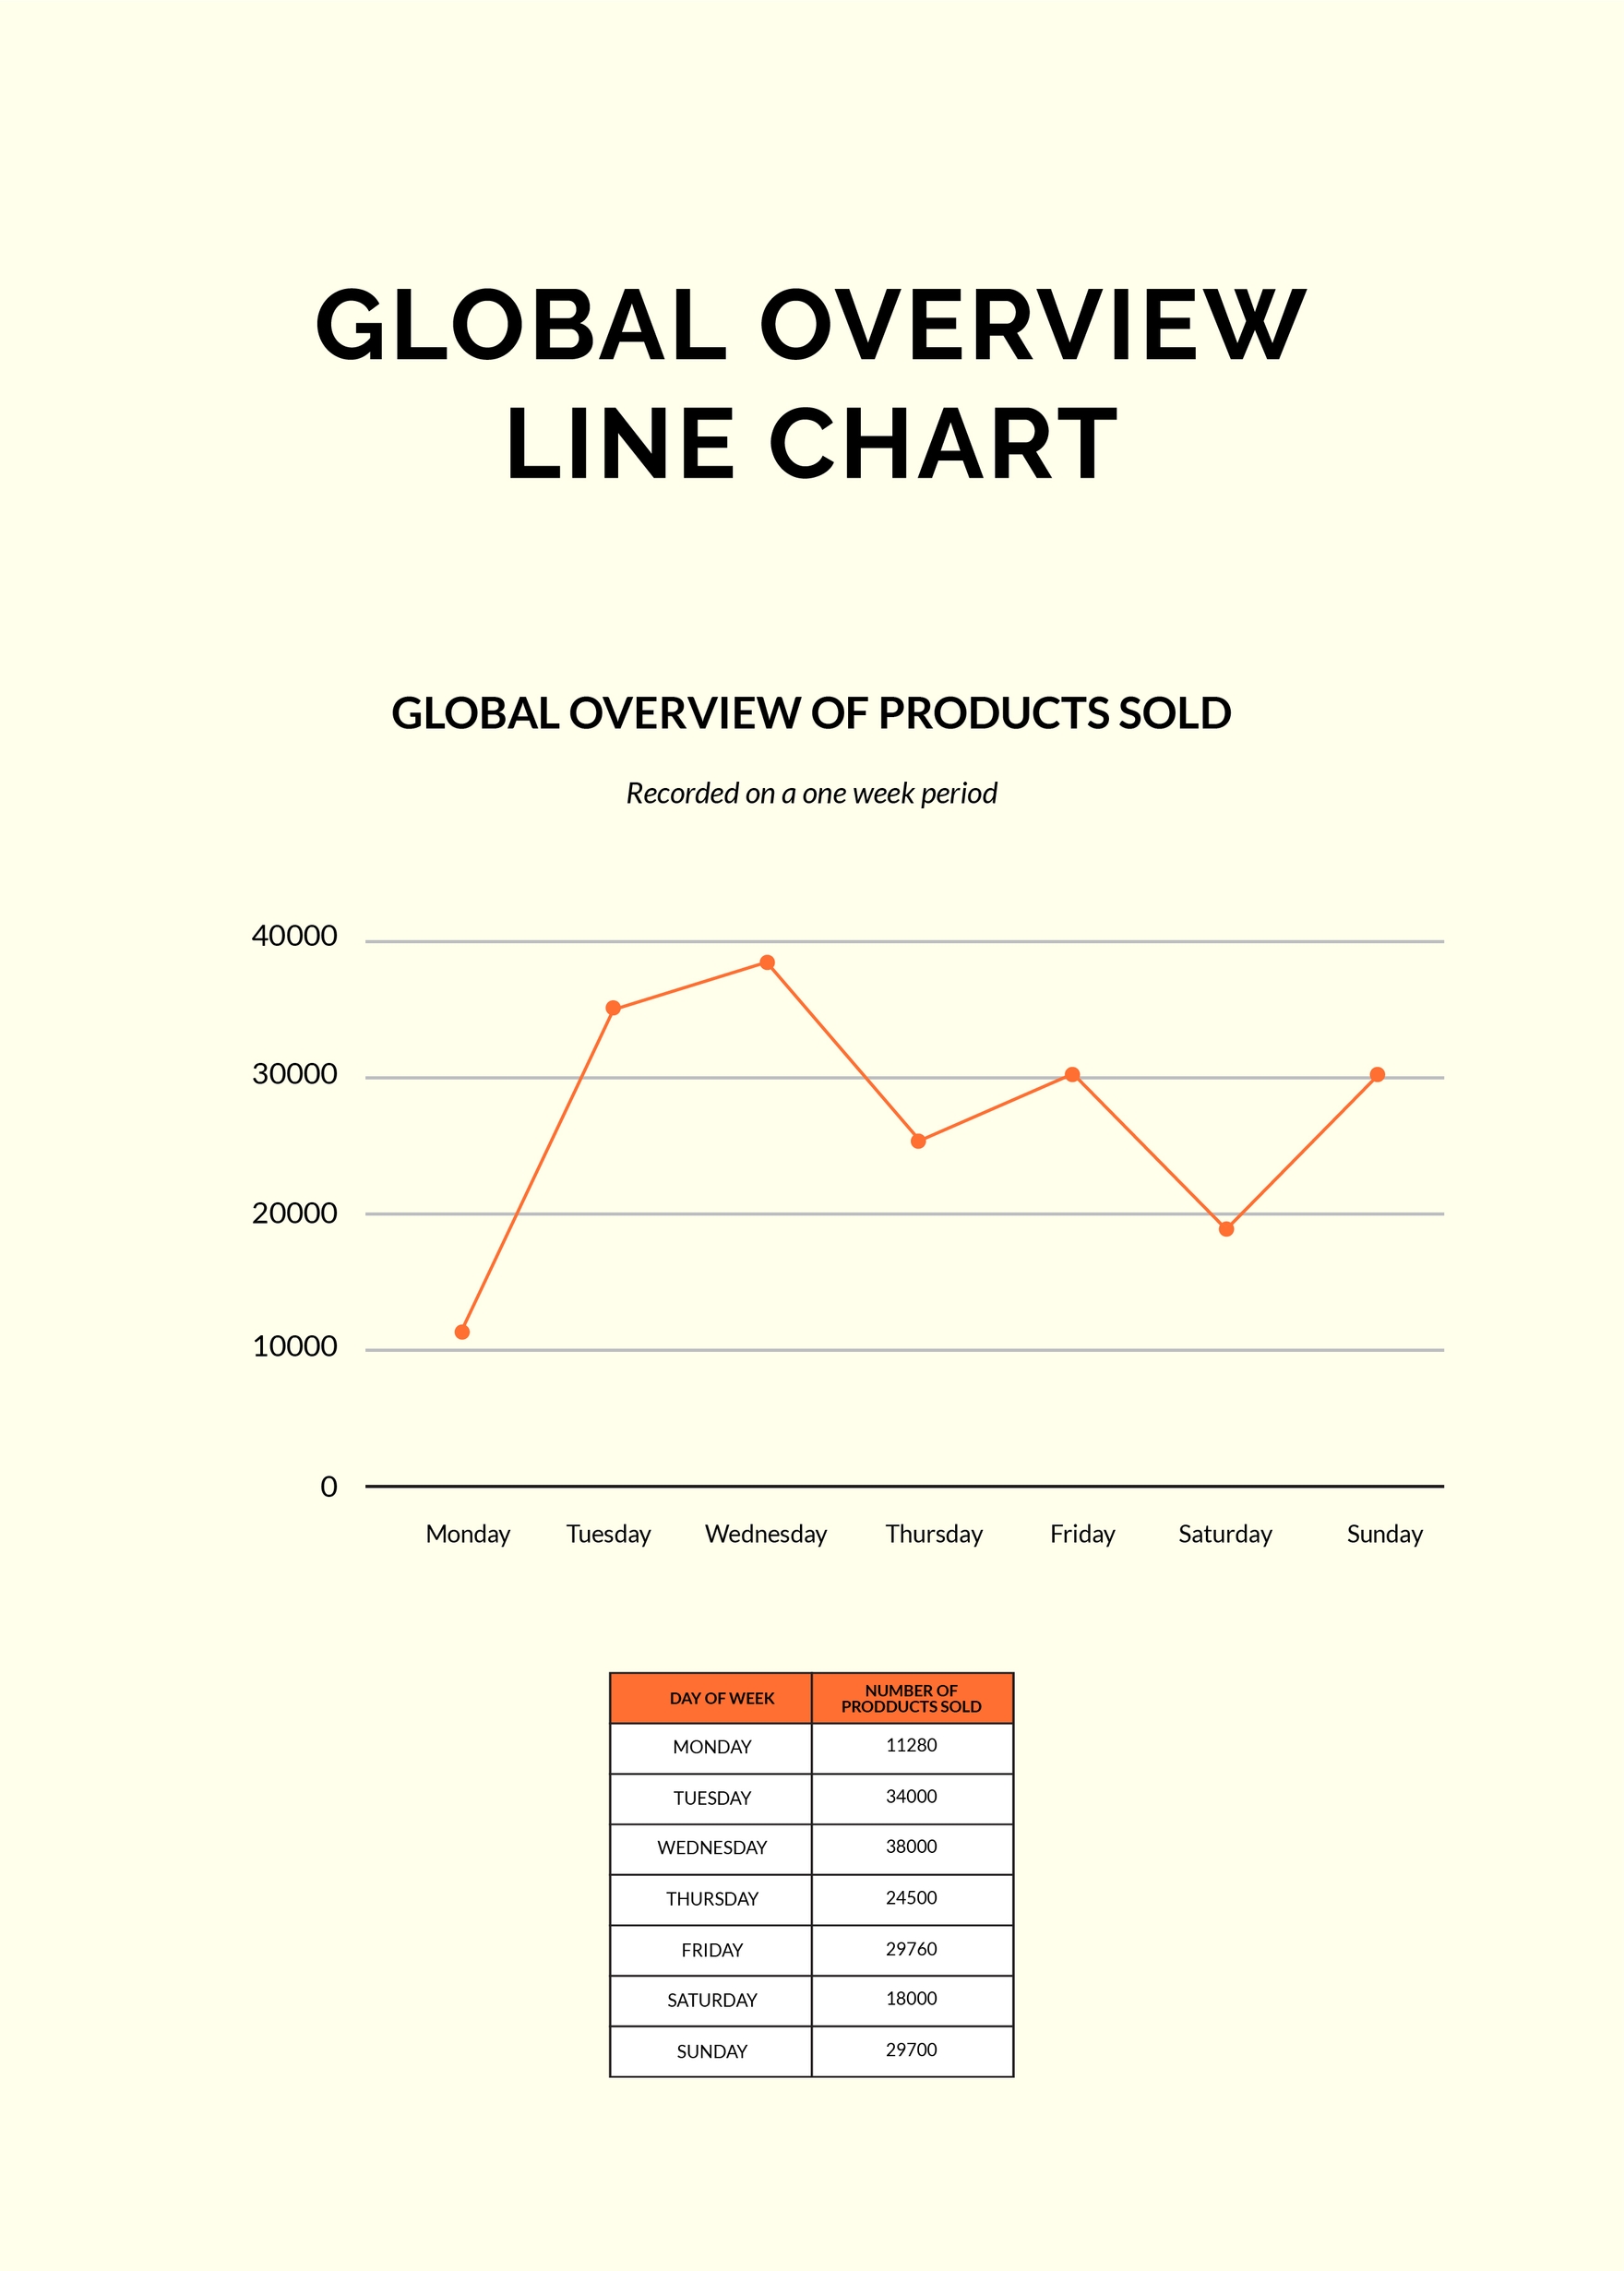 Free Global Overview Line Chart in PDF, Illustrator